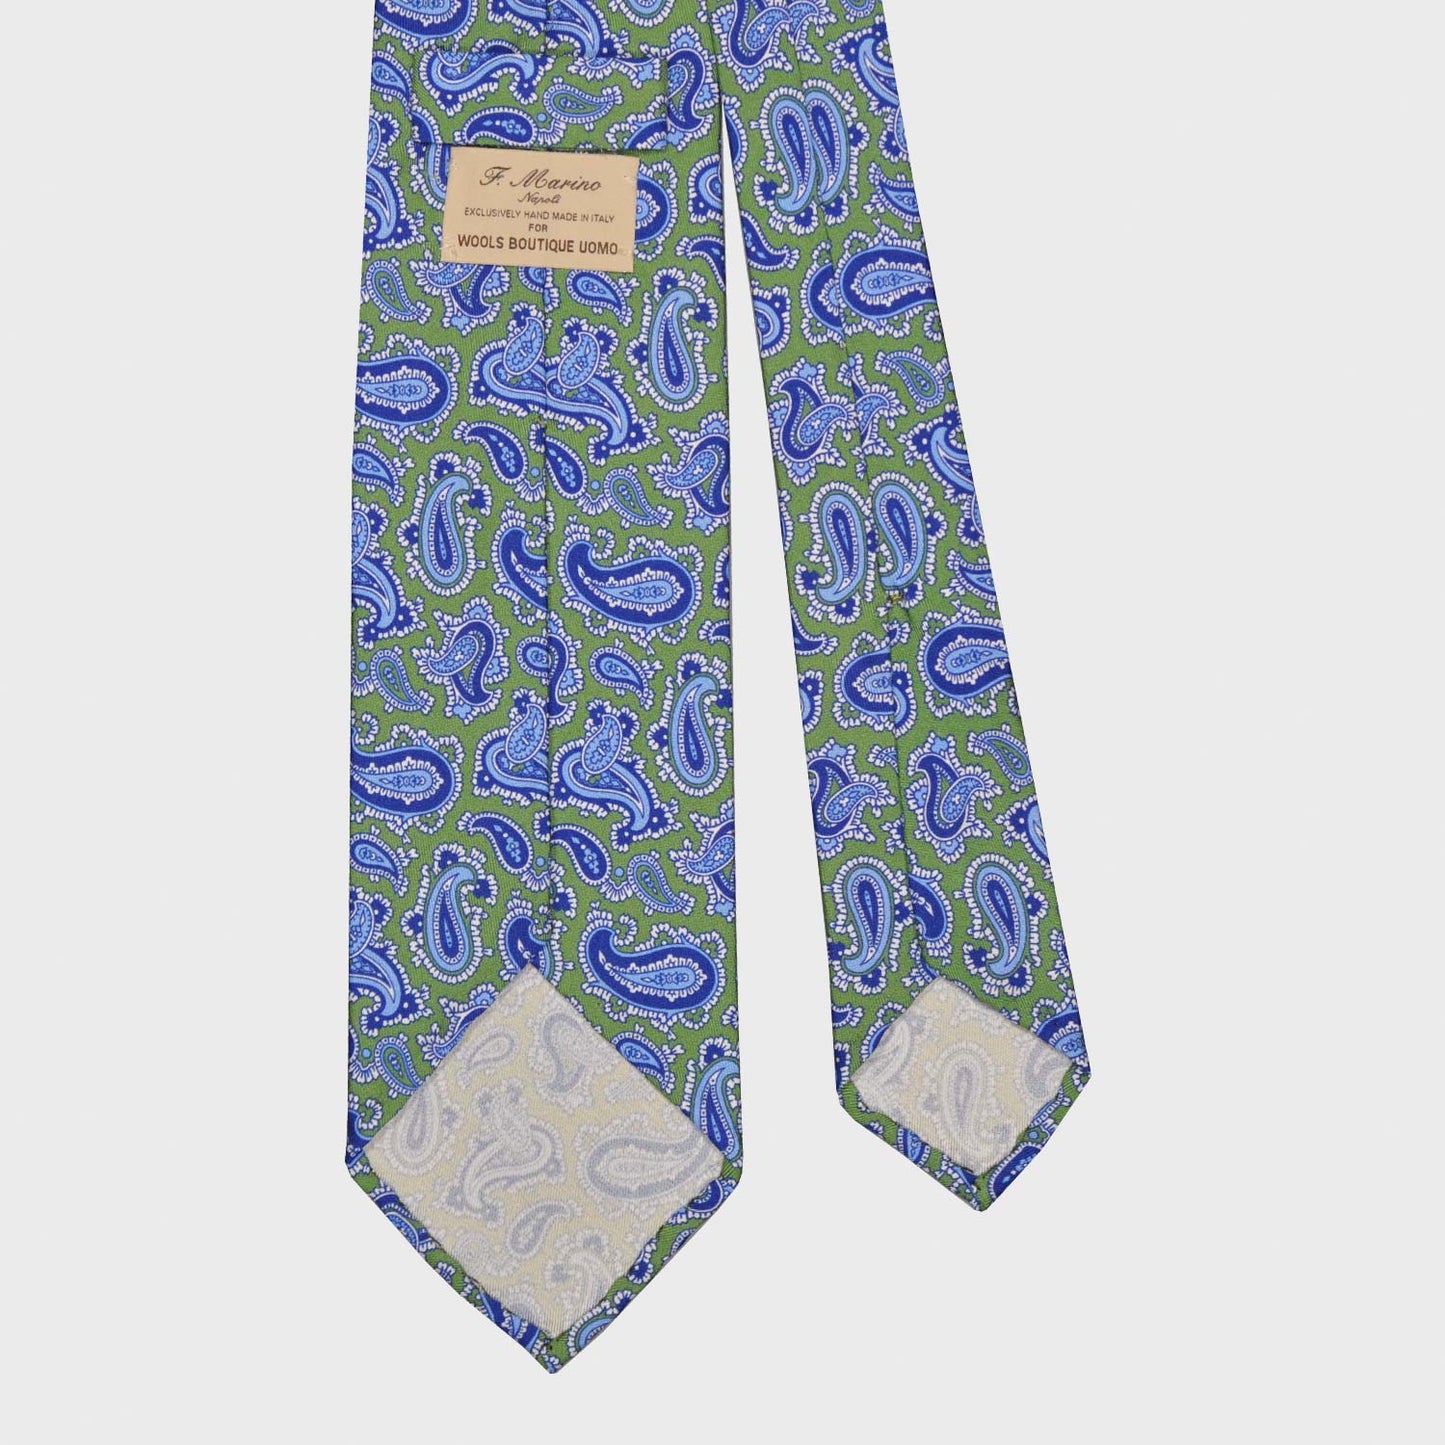 Load image into Gallery viewer, F.Marino Paisley Print Silk Tie 3 Folds Lime-Wools Boutique Uomo
